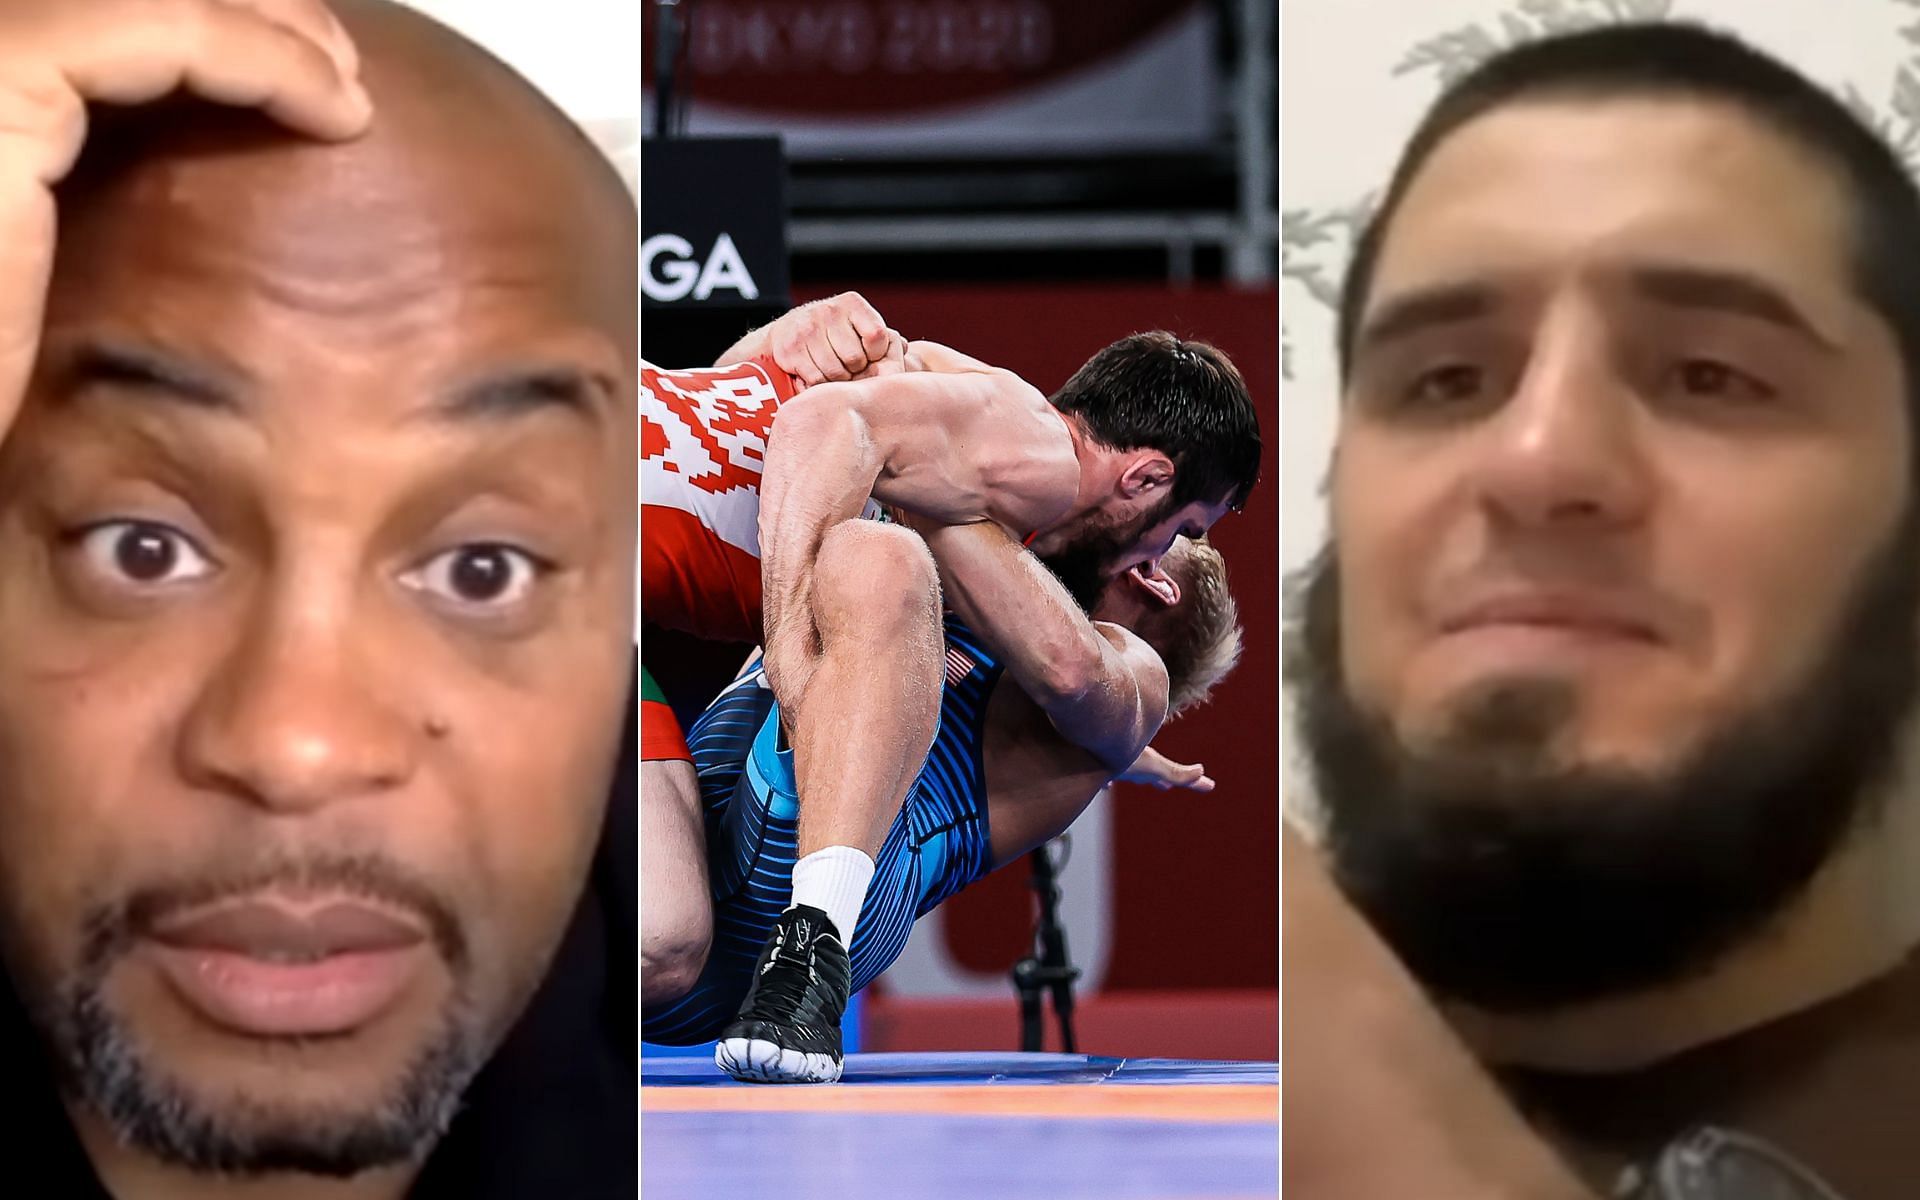 Daniel Cormier [Left], Magomedov vs. Dake at the Olympics [Middle], and Islam Makhachev [Right] [Photo credit: Daniel Cormier - YouTube, and @Wrestling - Twitter]